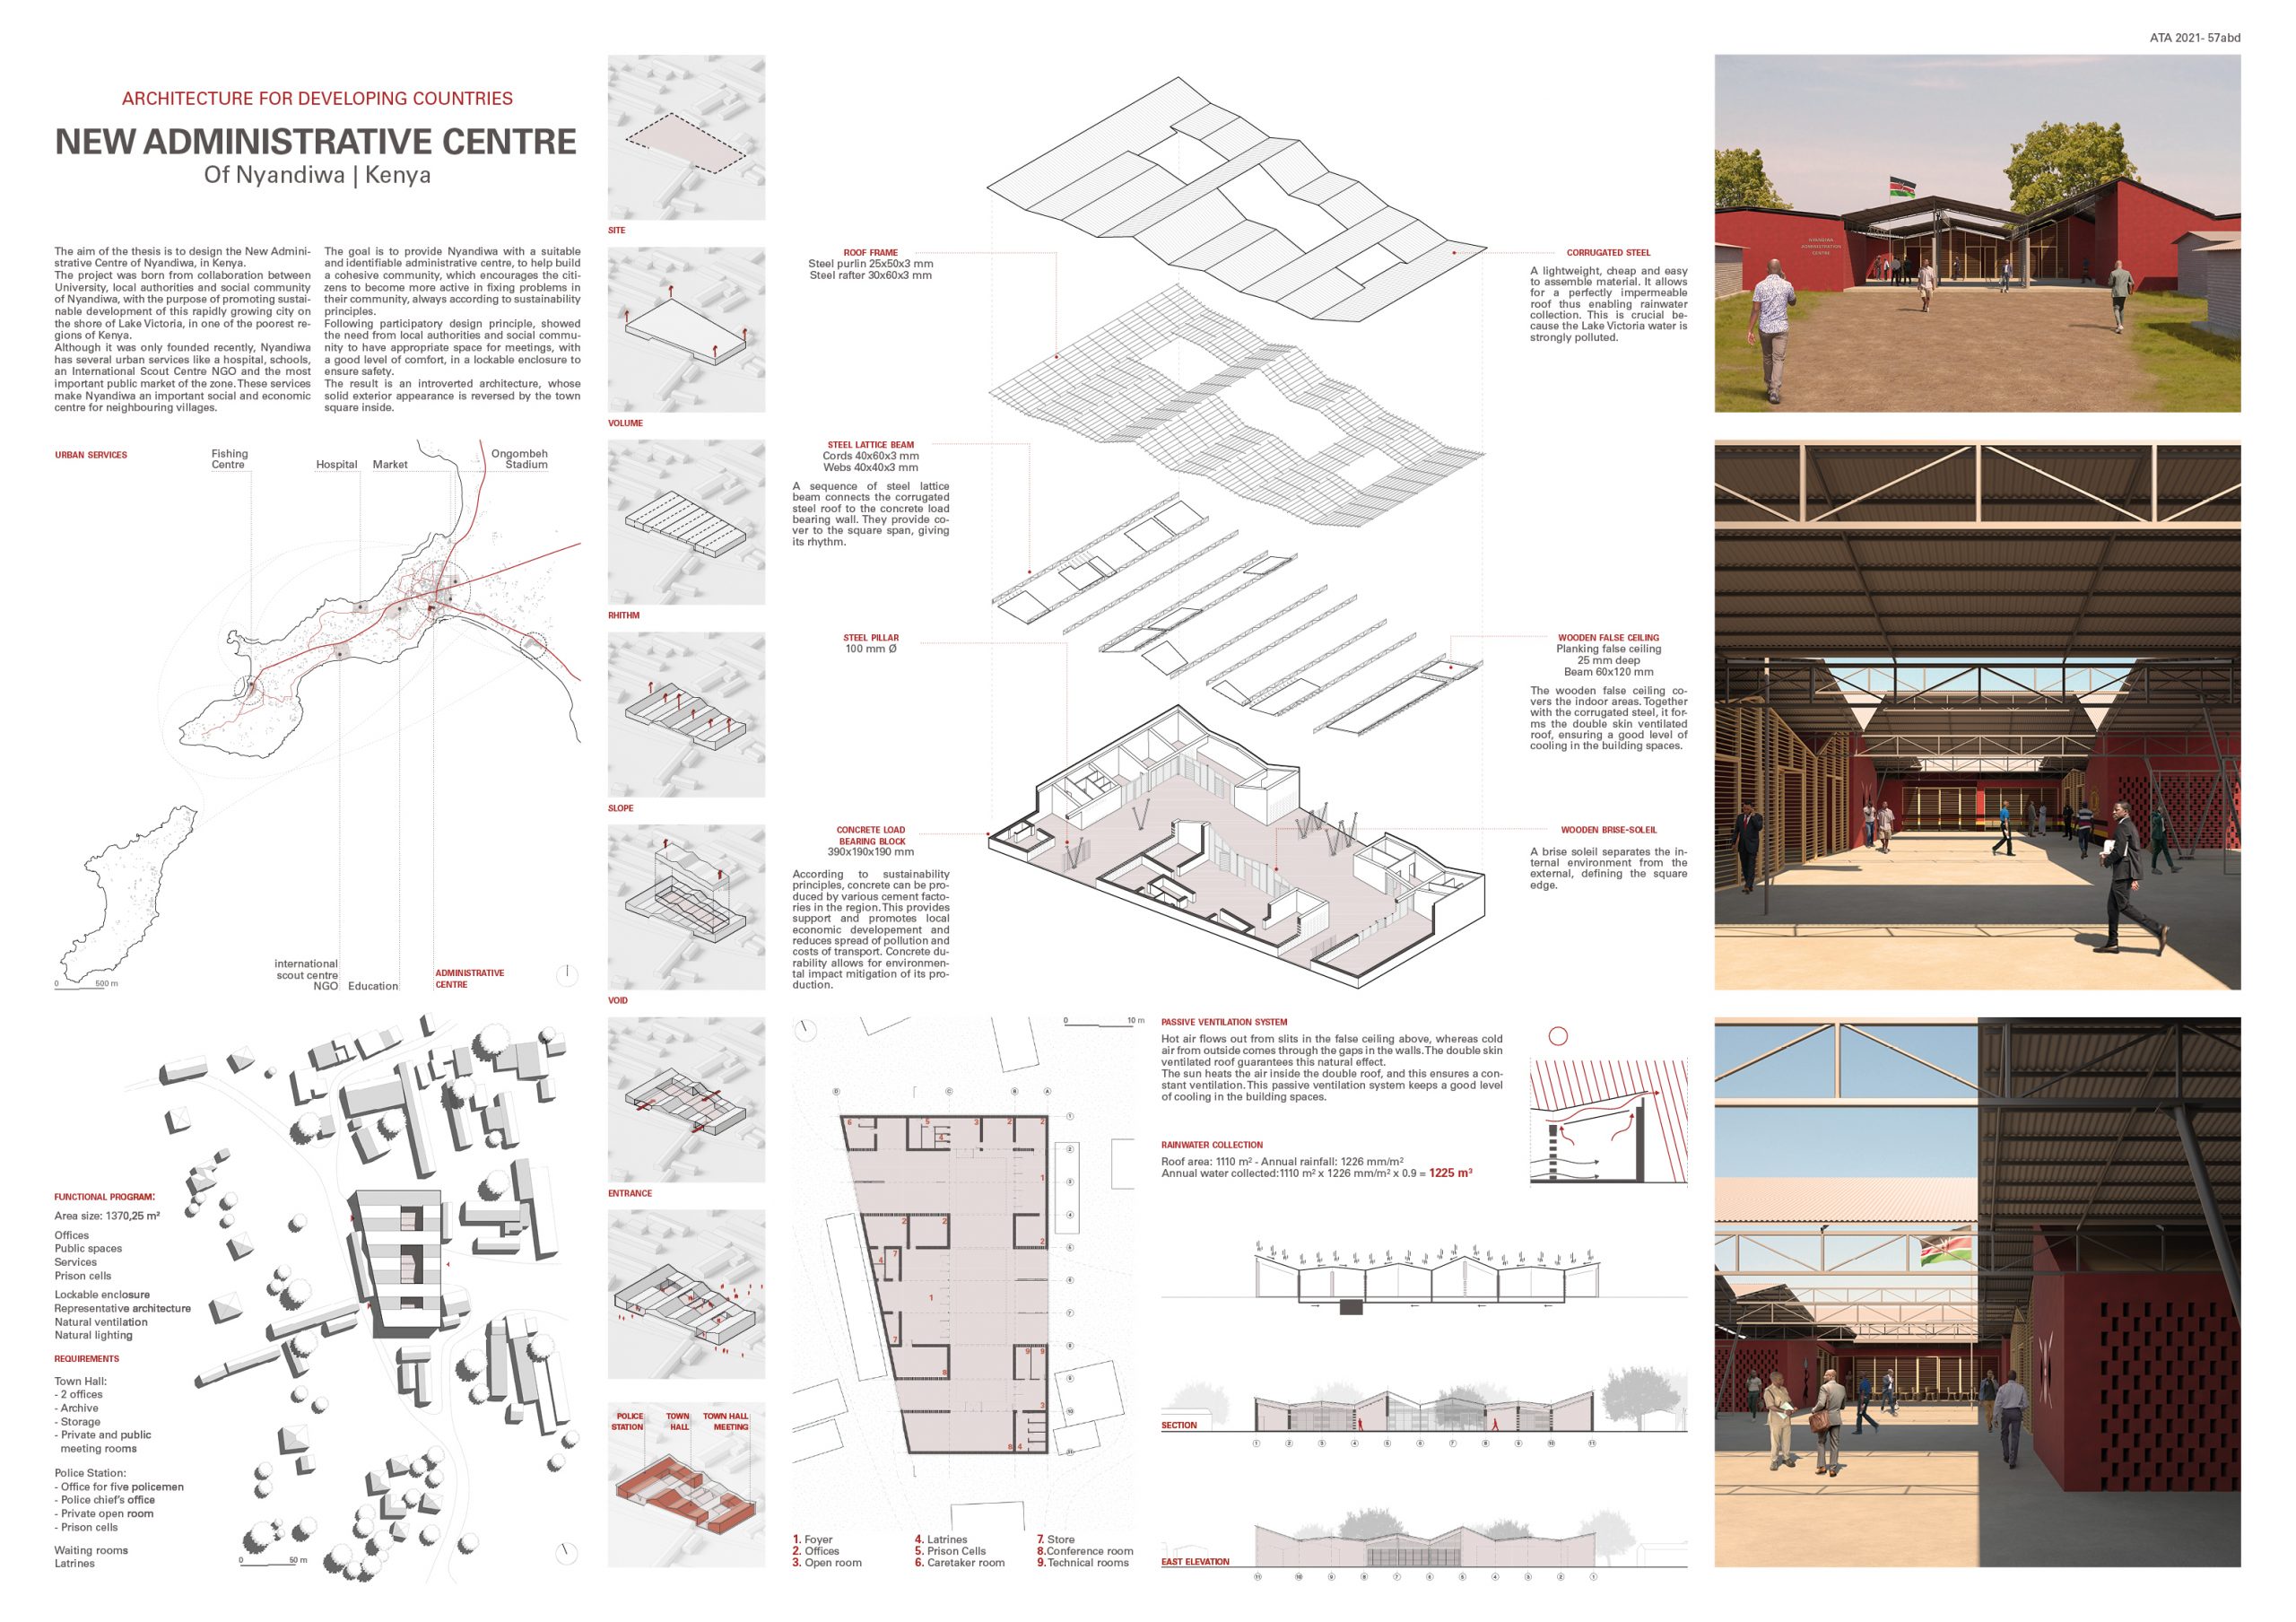 Architecture for Developing Countries. New Administrative Centre of Niandiwa – Kenya Board